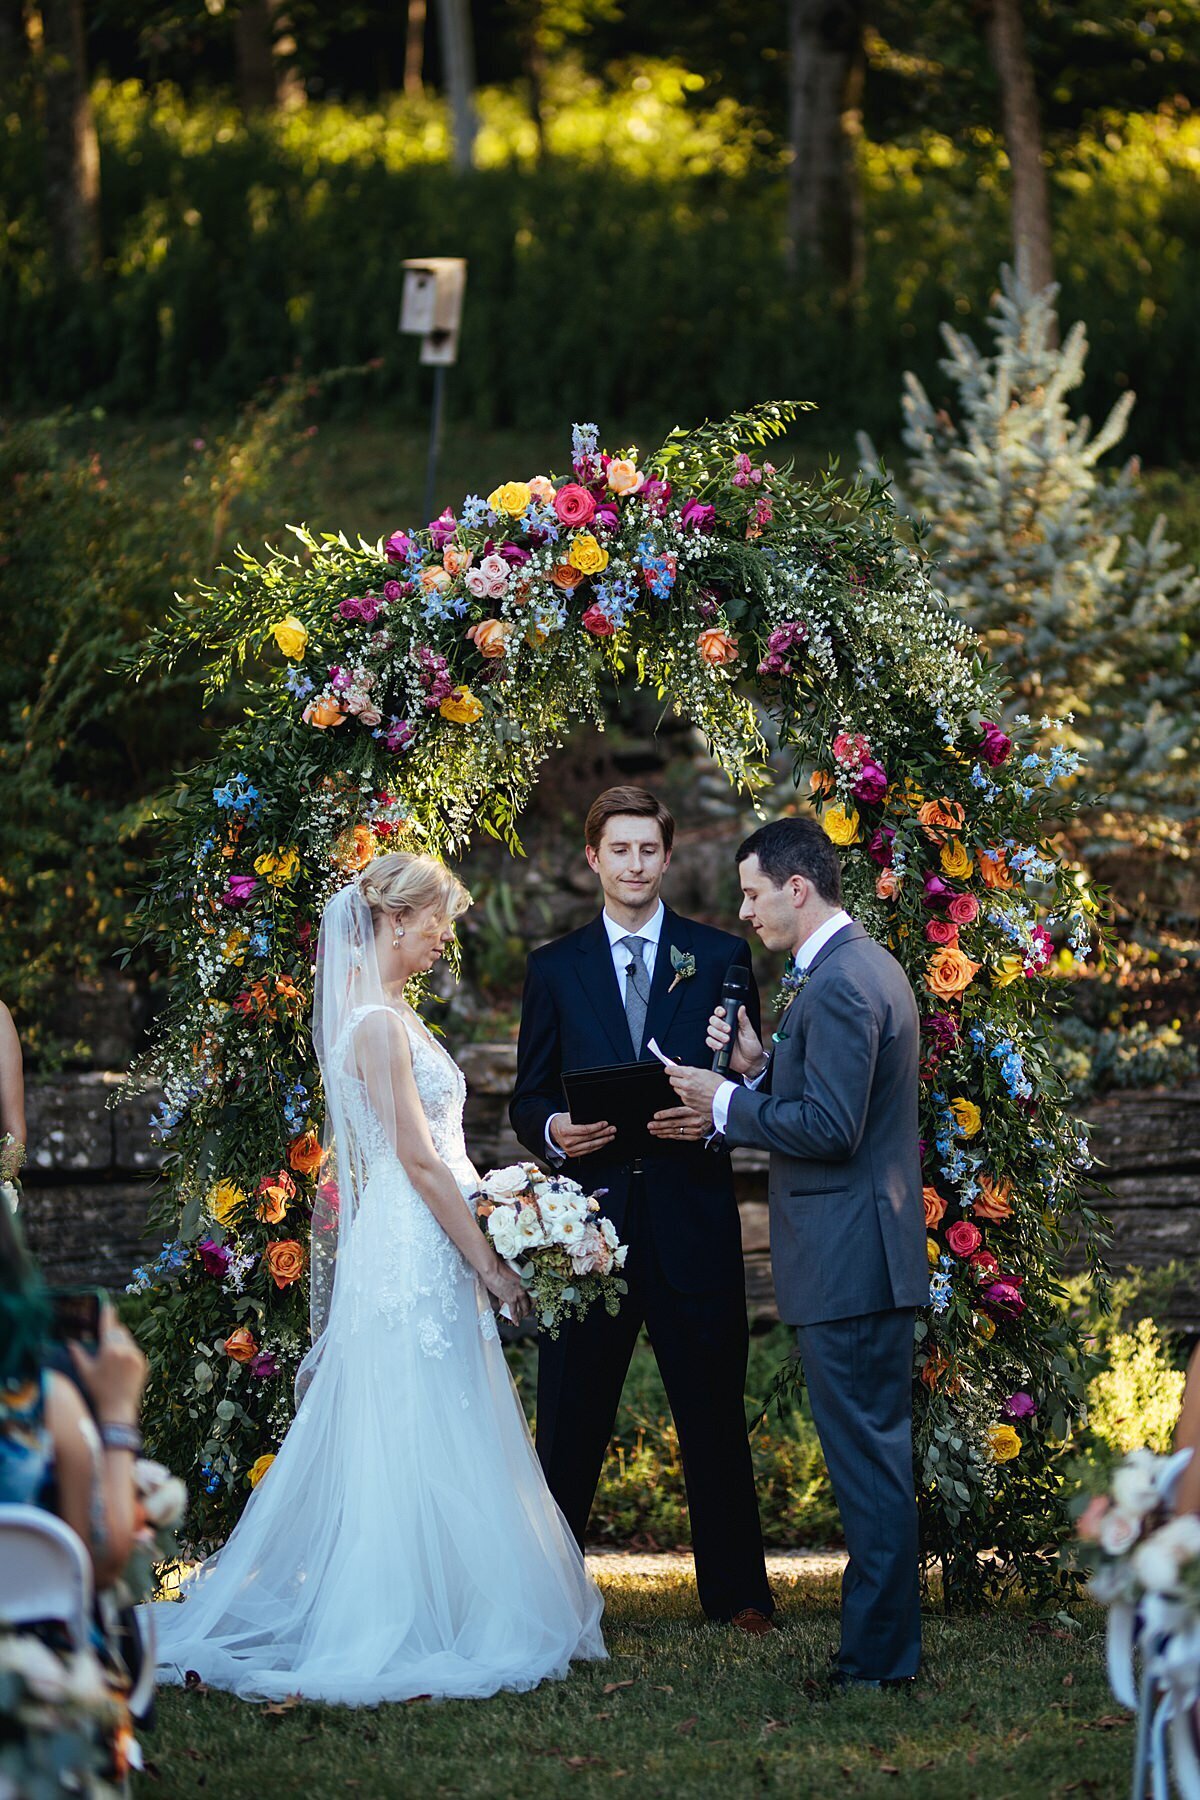 The bride wearing a long sleeveless lave wedding gown and a long sheer veil holds a large bouquet of white, ivory, blush and peach roses as the groom wearing a charcoal gray tuxedo holds a microphone and a piece of paper as he recites his vows to the bride. The wedding officiant weaing a black suit and grey tie stands behind them under the lush floral arbor. The floral arbor is covered in greenery and accented by red, hot pink, yellow, orange, blue and purple flowers for the wedding at Cheekwood.